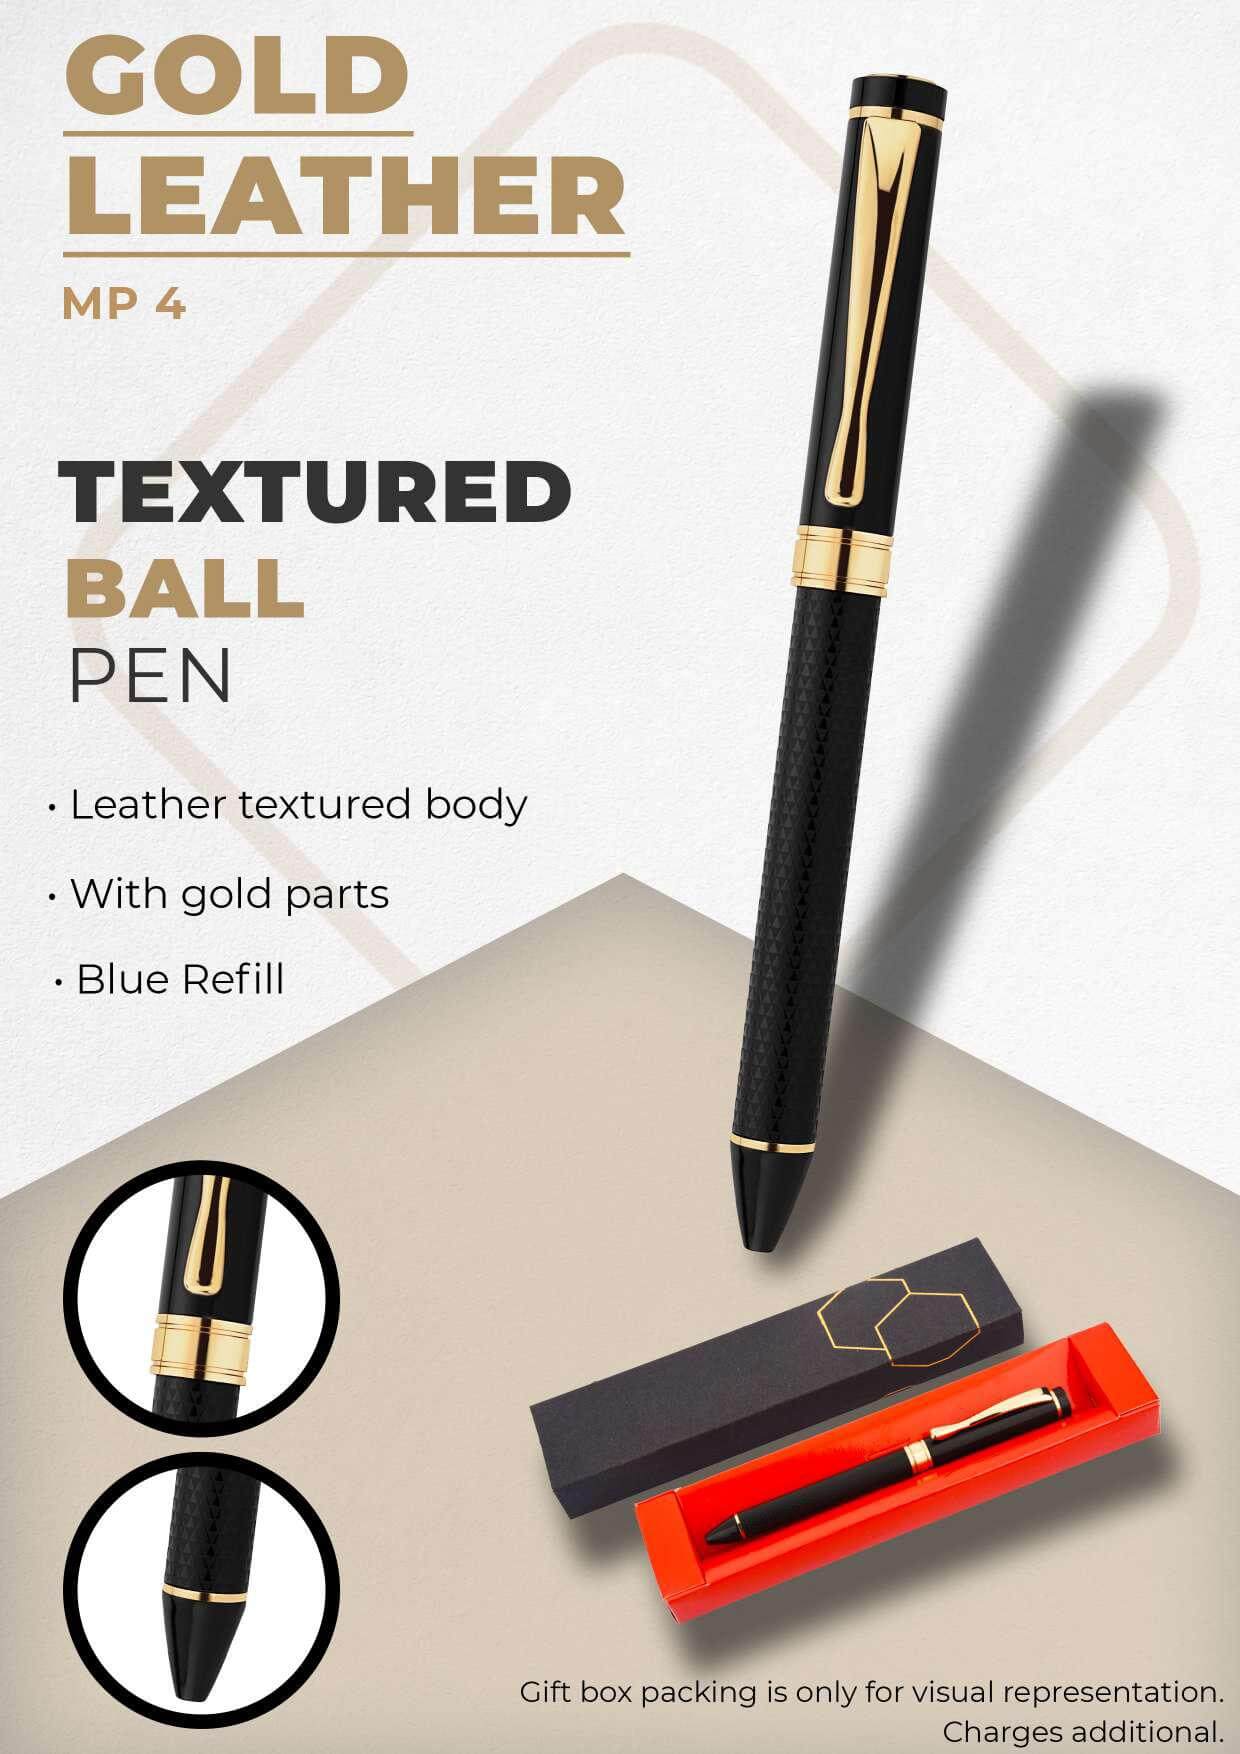 Textured Ball Pen Gold Leather